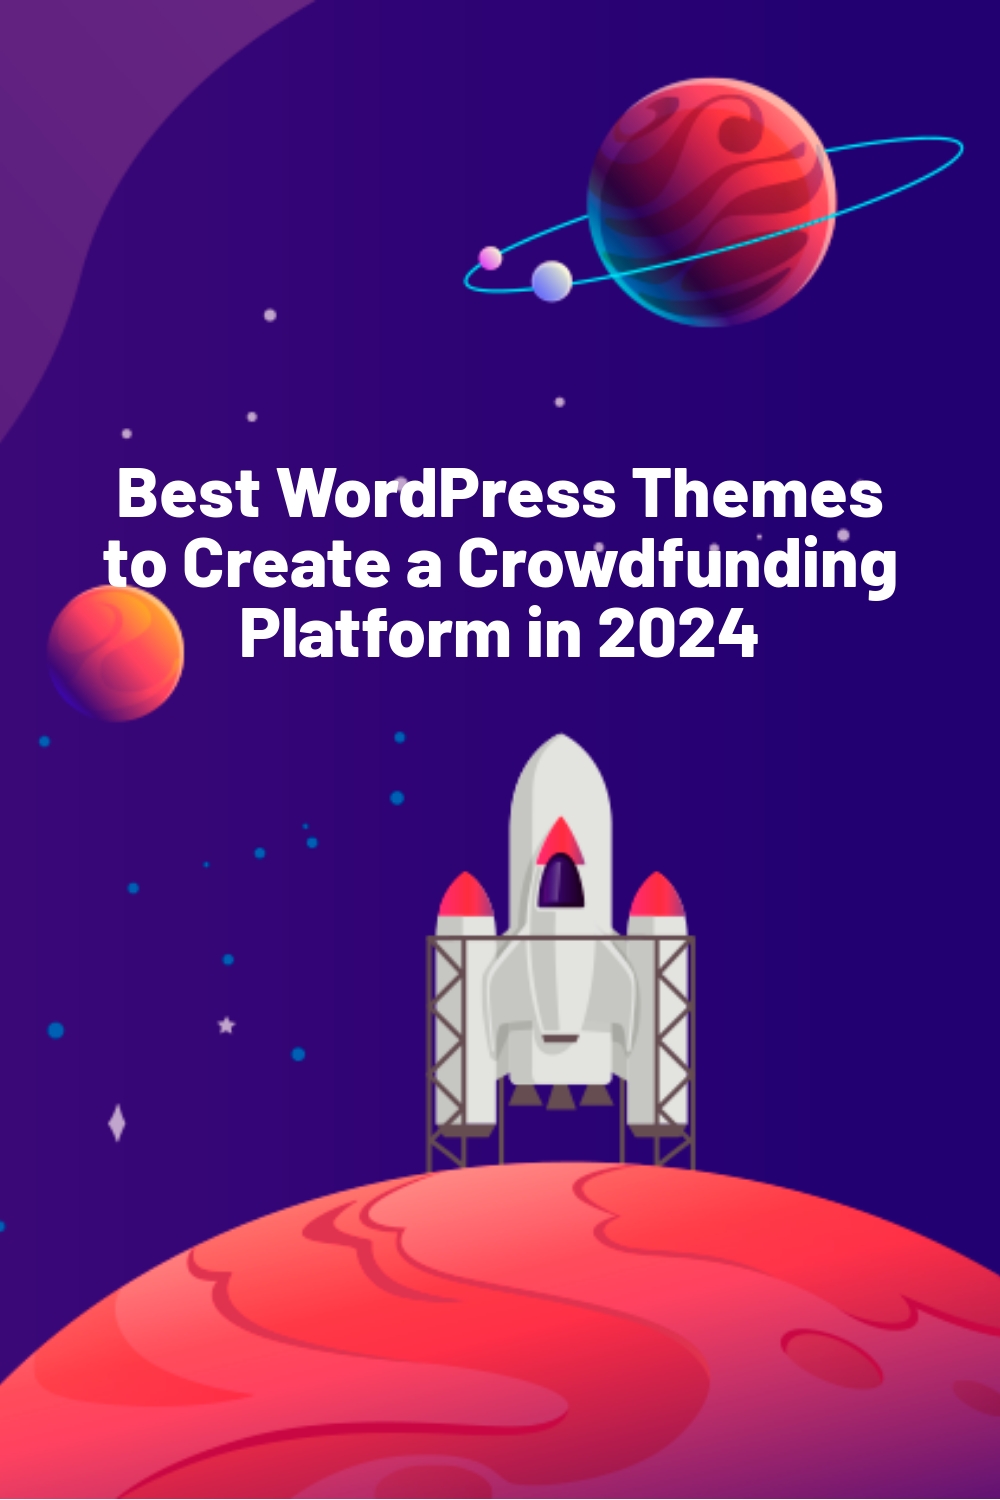 Best WordPress Themes to Create a Crowdfunding Platform in 2024